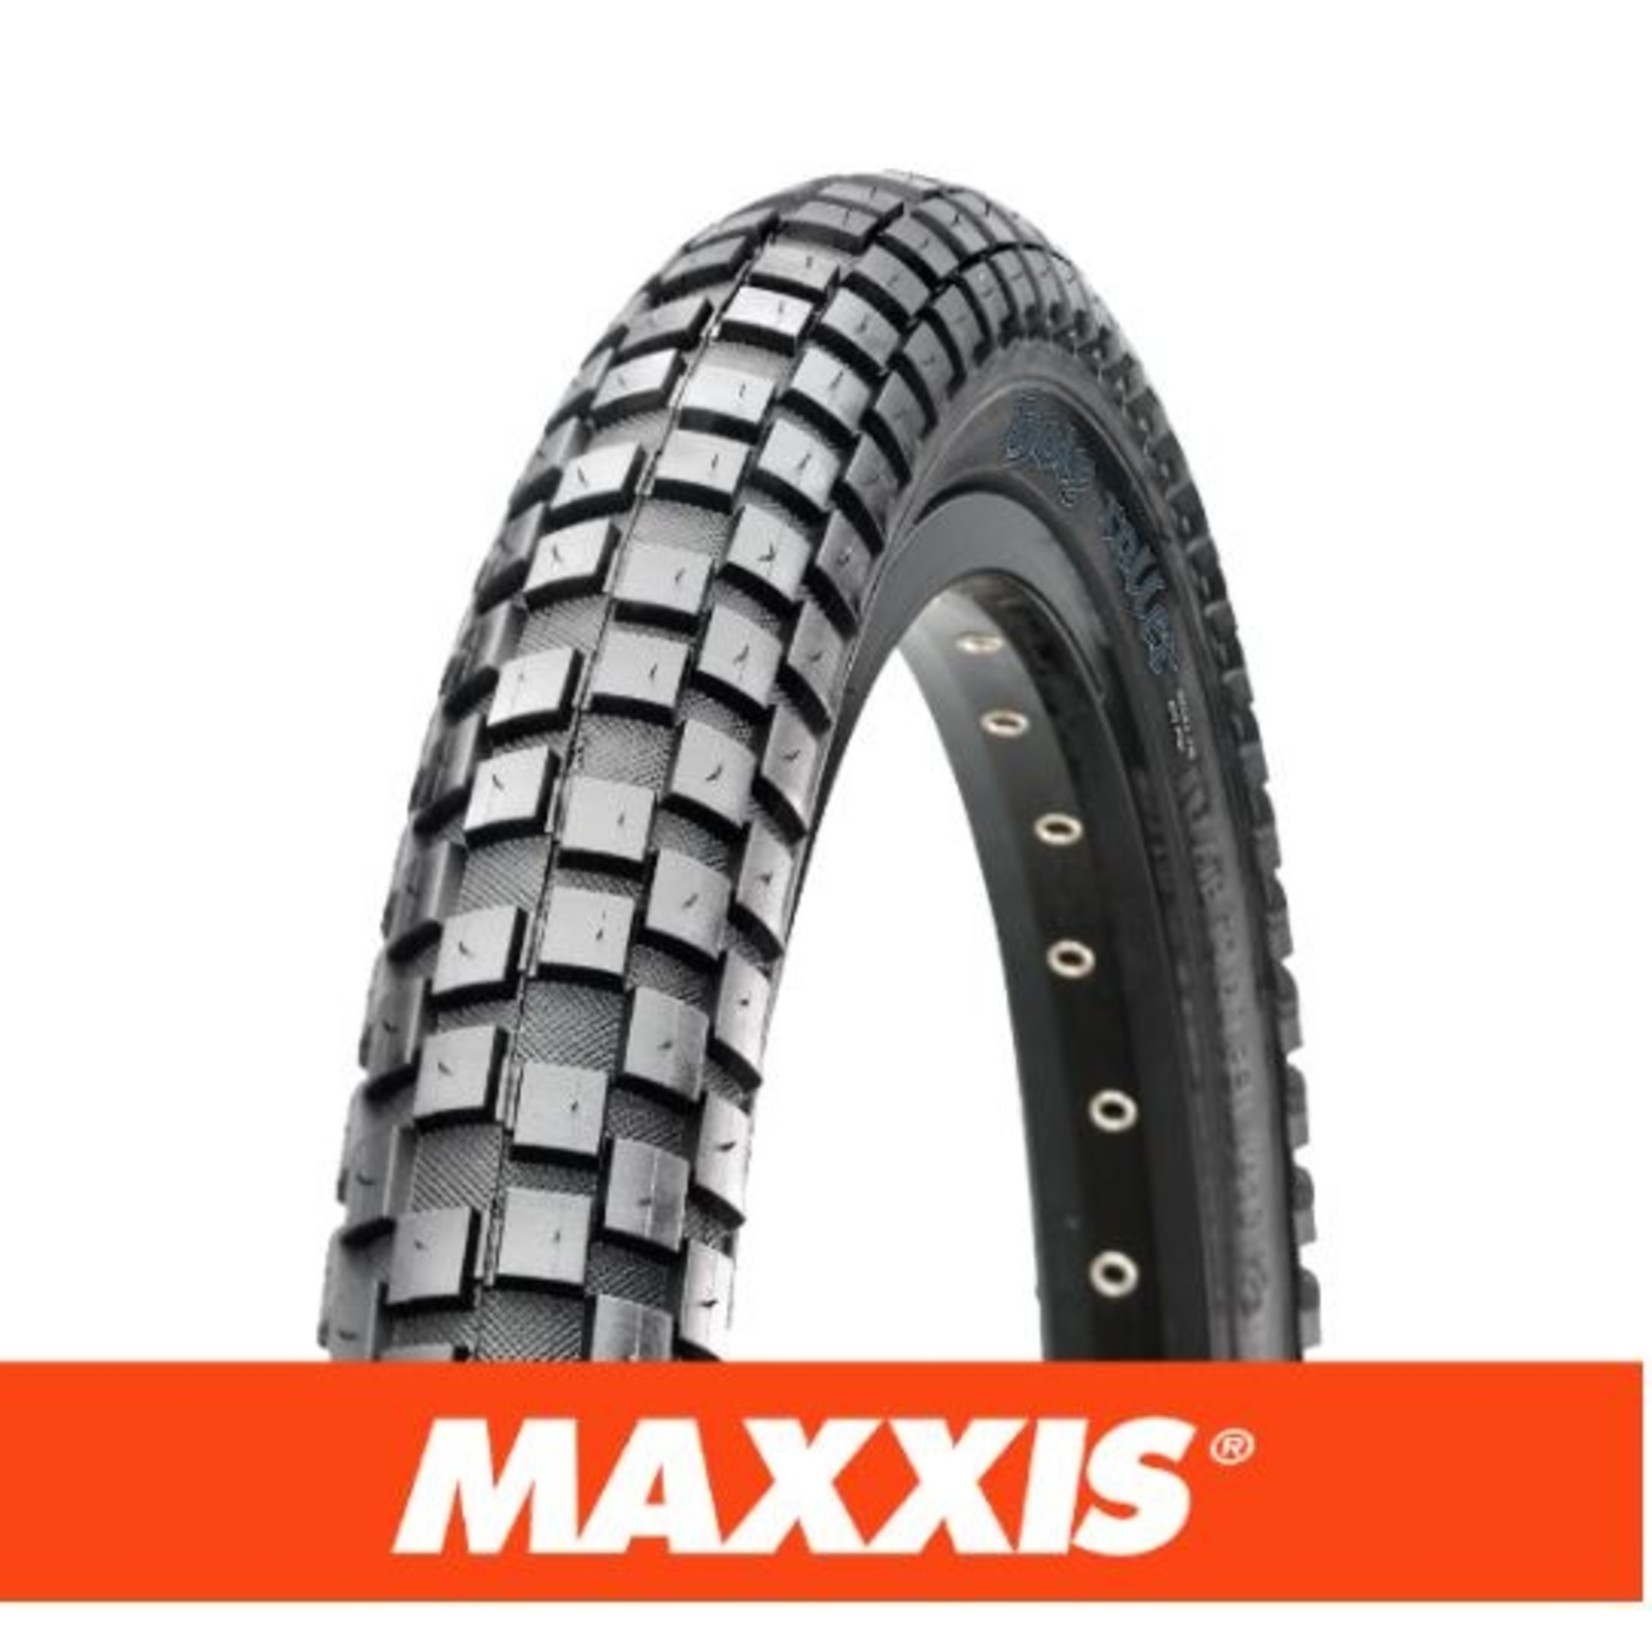 Maxxis Maxxis Holy Roller Bike Tyre - 24 X 1.85 - Wirebead 60TPI 70A